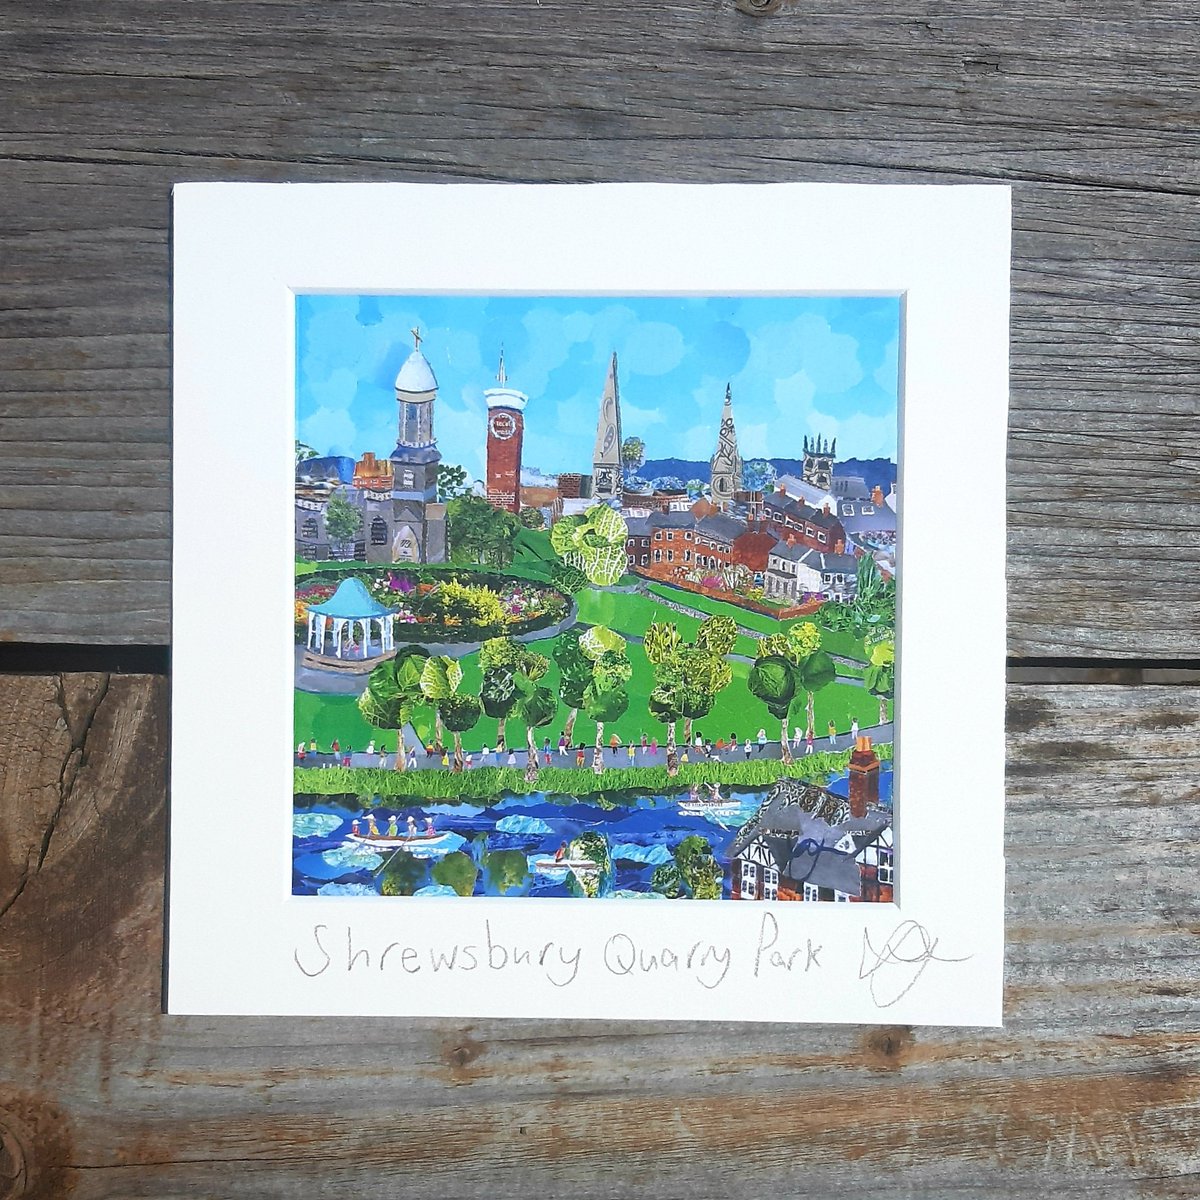 New to my #tornpaper world is #shrewsburyQuarryPark ●#prints●#cards●#coasters lynevansdesigns.co.uk I hope you like it...more #new #artwork coming soon...